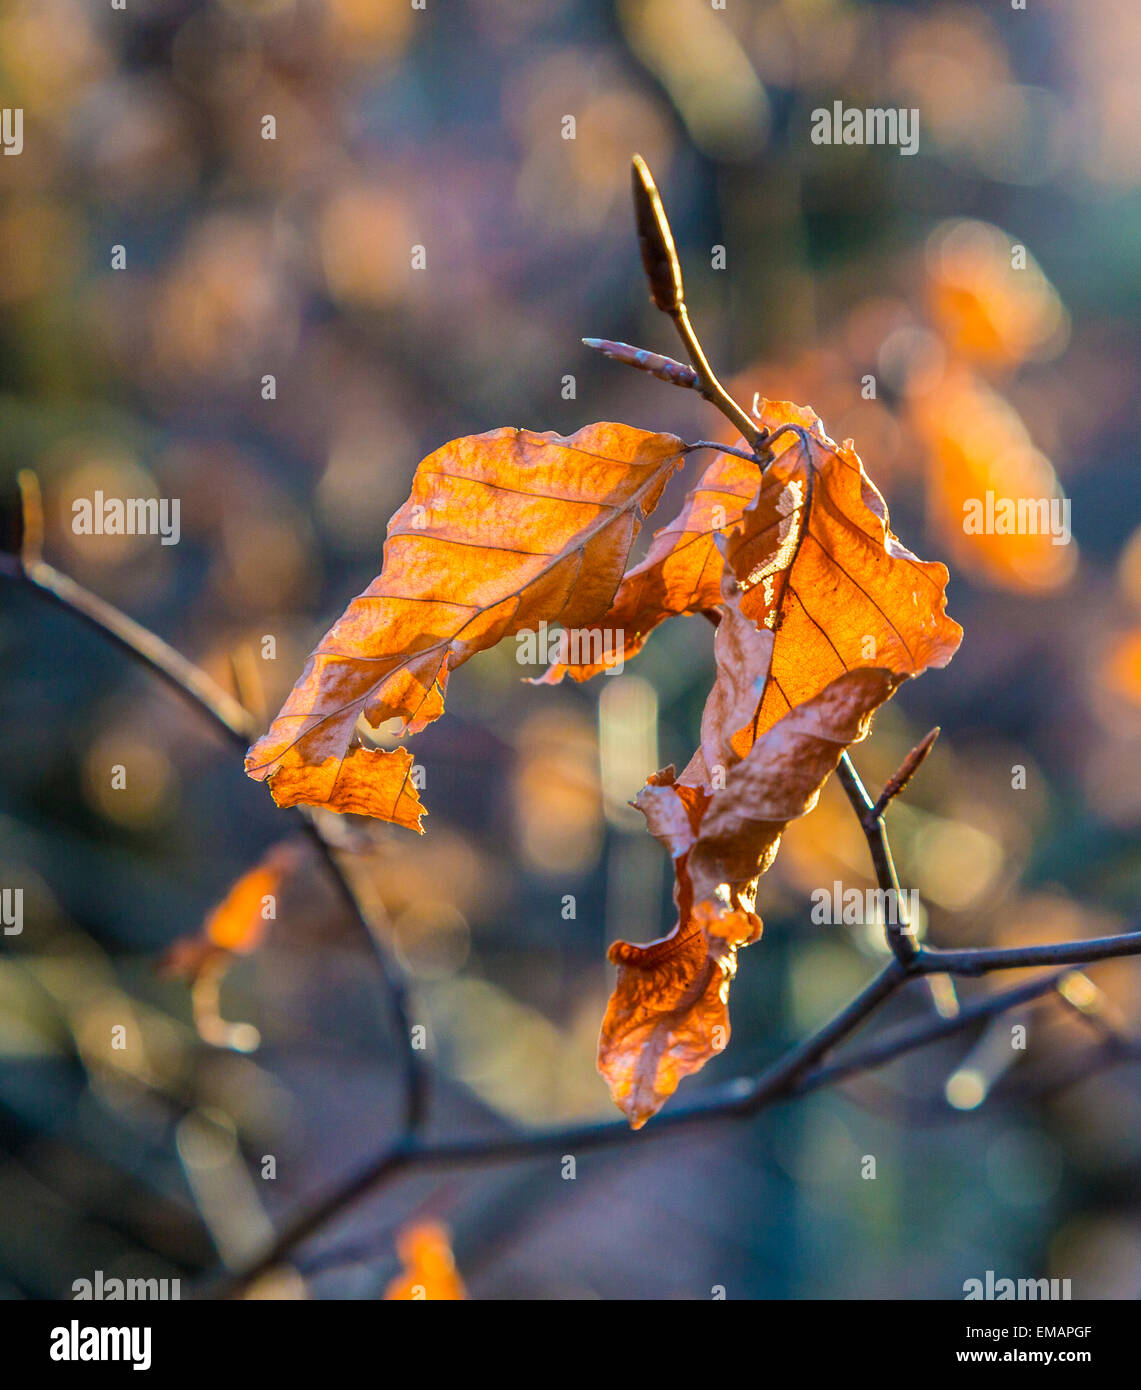 brown leaf at tree in bright sunlight Stock Photo